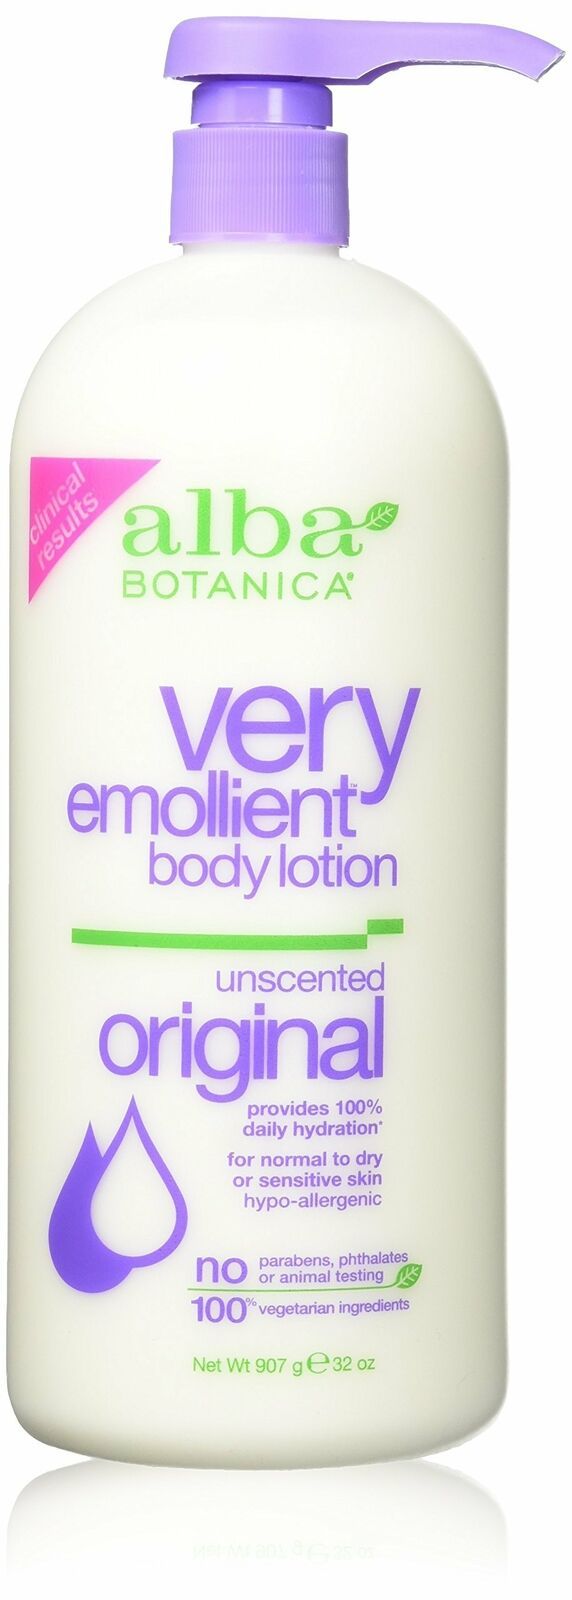 Primary image for NEW Alba Botanica Very Emollient Body Lotion Original Unscented - 32 Oz